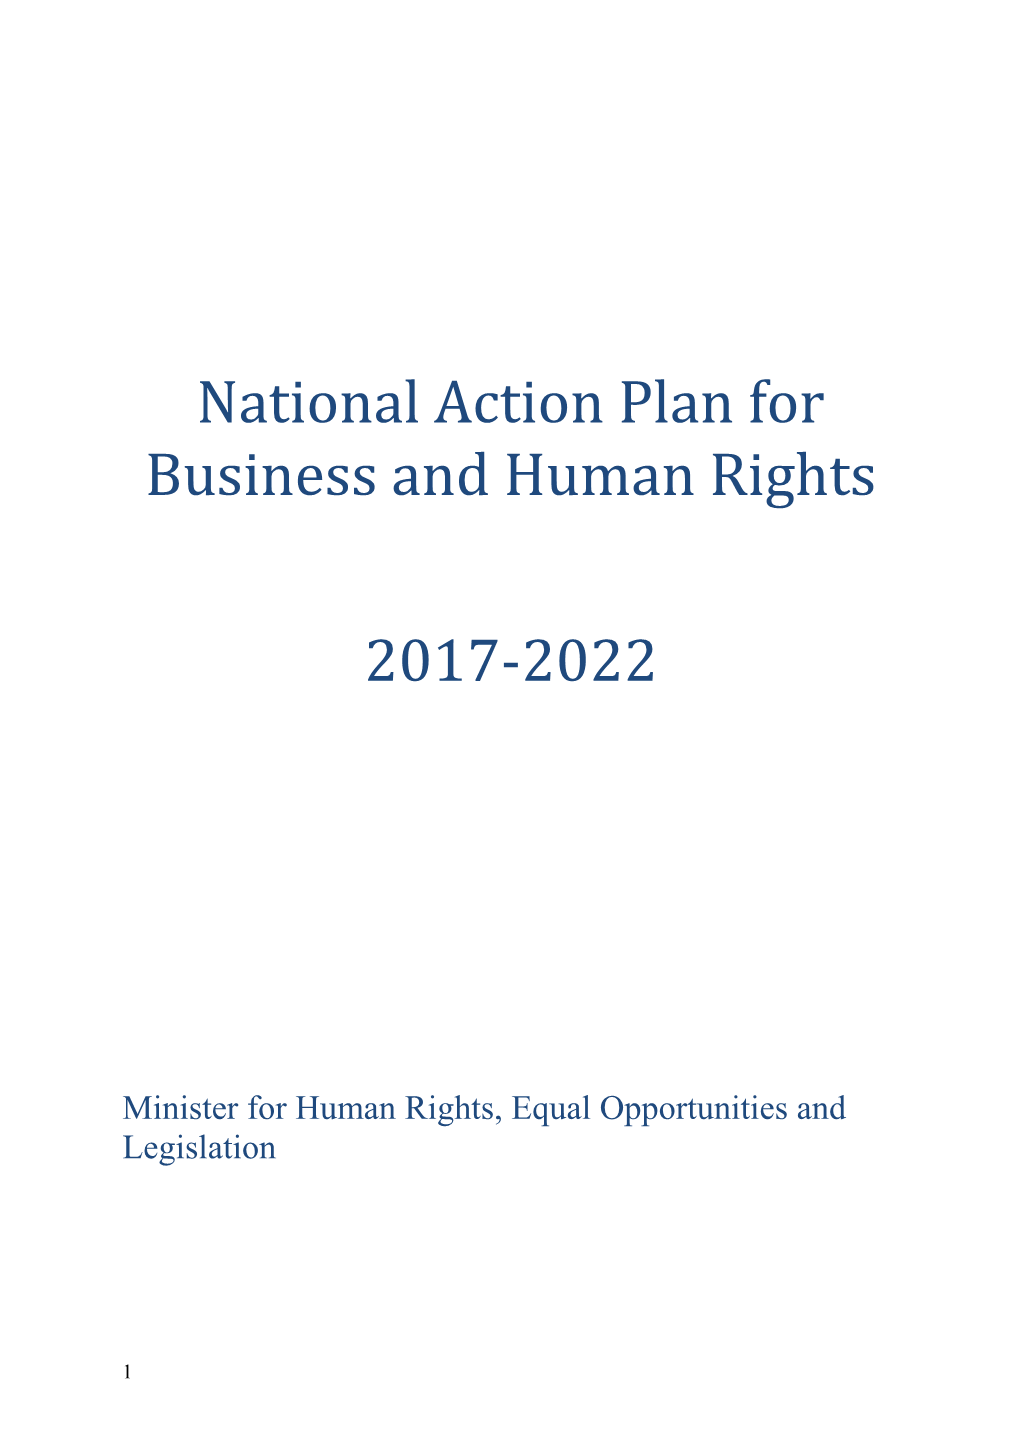 National Action Plan for Business and Human Rights